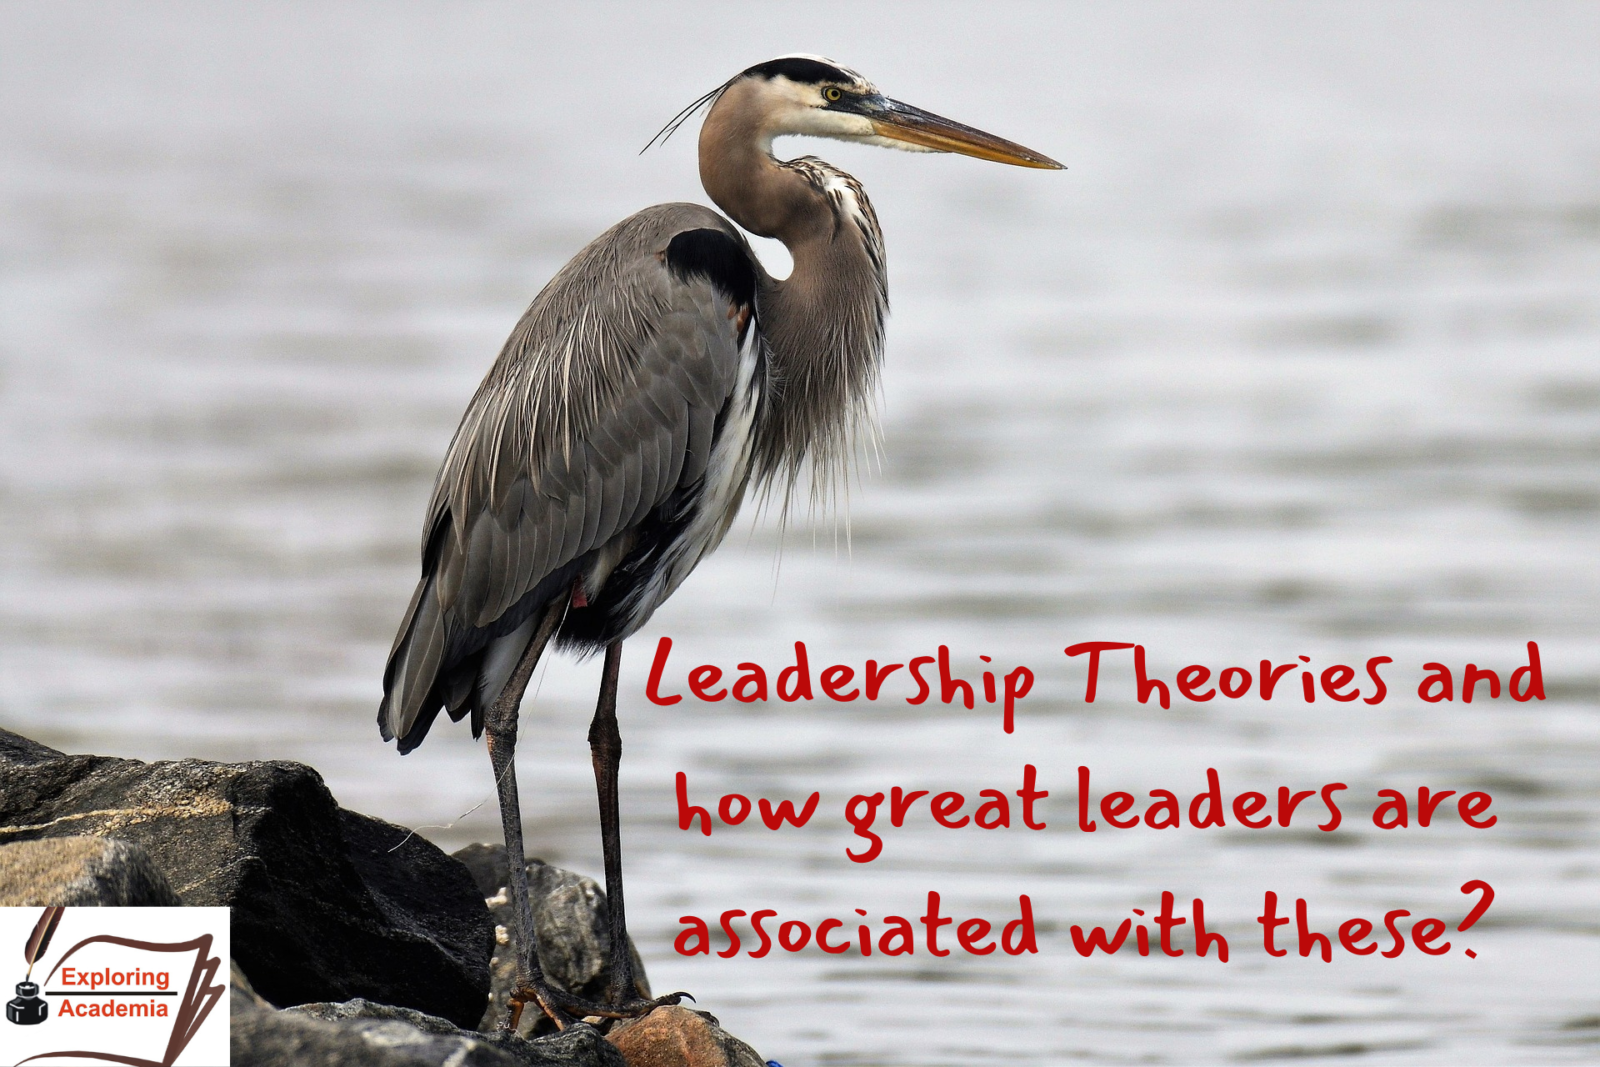 Leadership Theories- how great leaders are associated with these